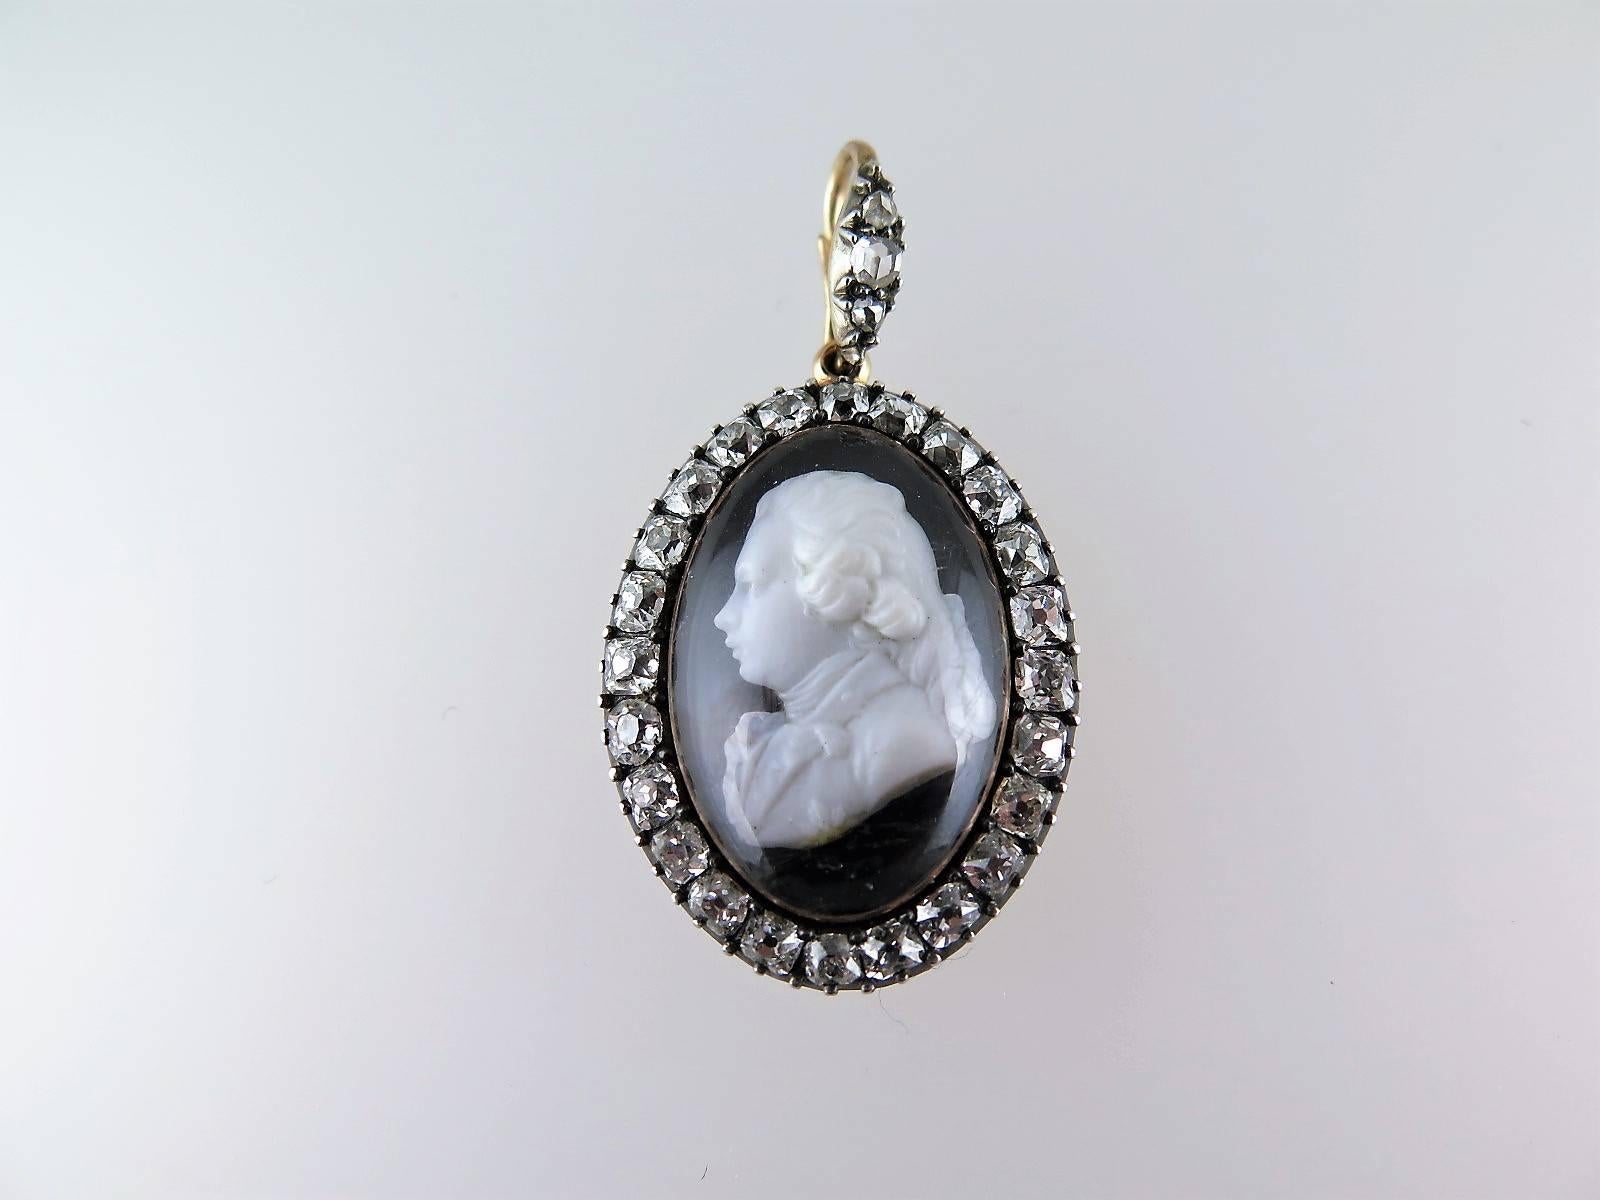 The oval pendant set with a paste cameo depicting the young George IV as Prince of Wales within a surround of old mine-cut diamonds with a diamond set bail, mounted in silver and gold, inscribed 'For George Ormsby-Gore from his grandfather G.F.